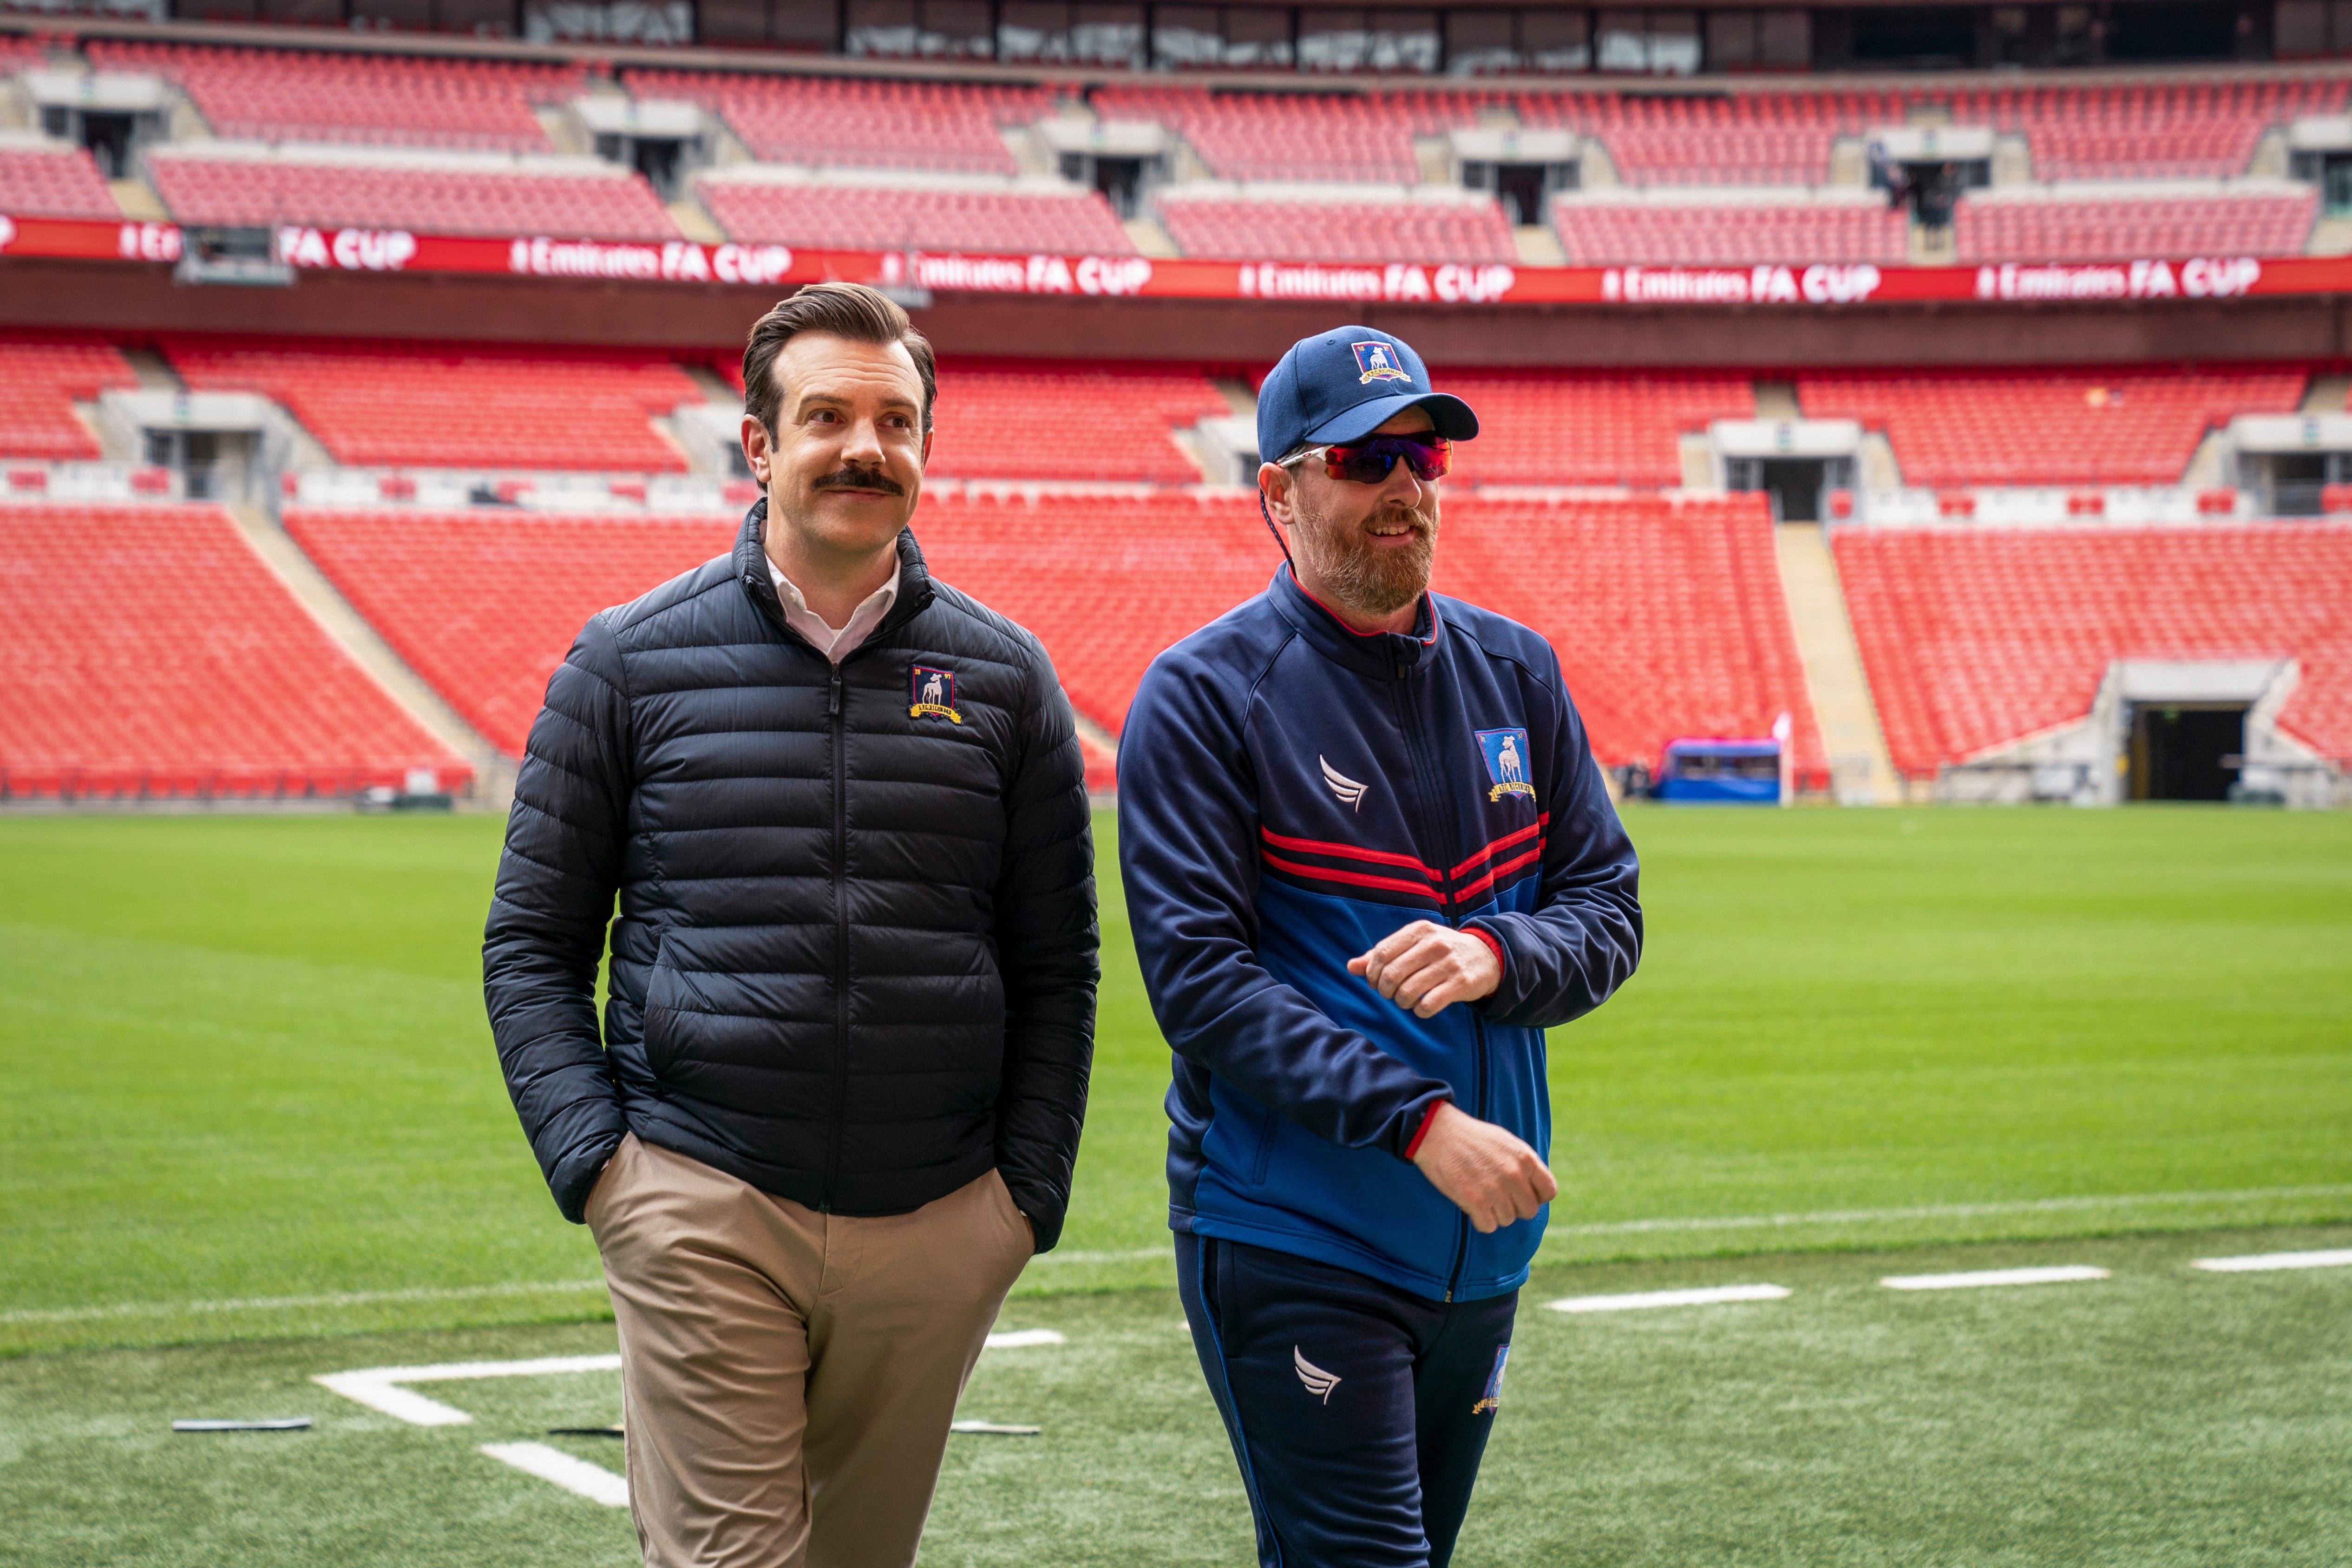 Jason Sudeikis as Ted Lasso and Brendan Hunt as Coach Beard in Ted Lasso